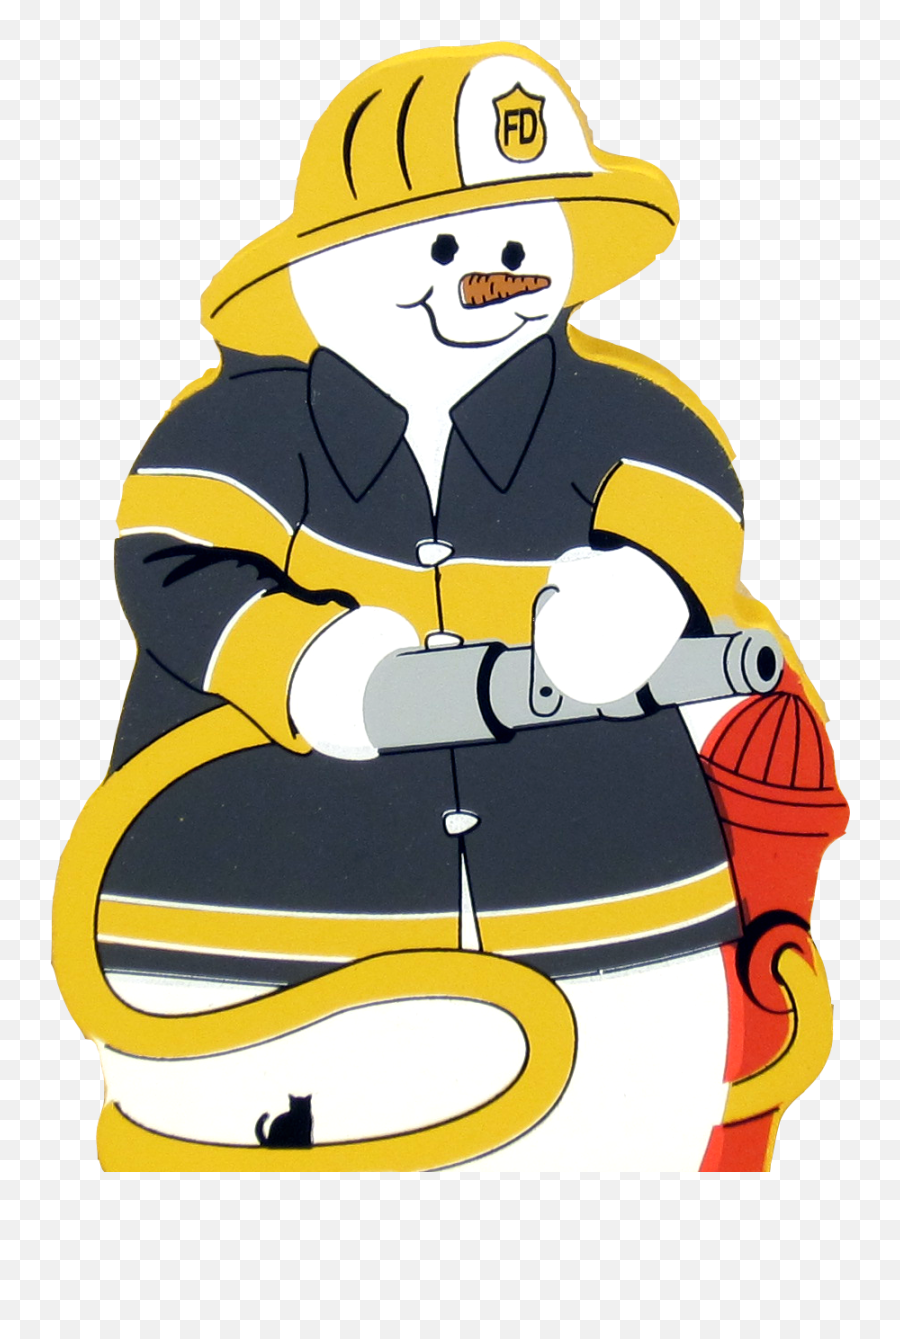 Abominable Snowman Png - Fireman Snowman,Abominable Snowman Png